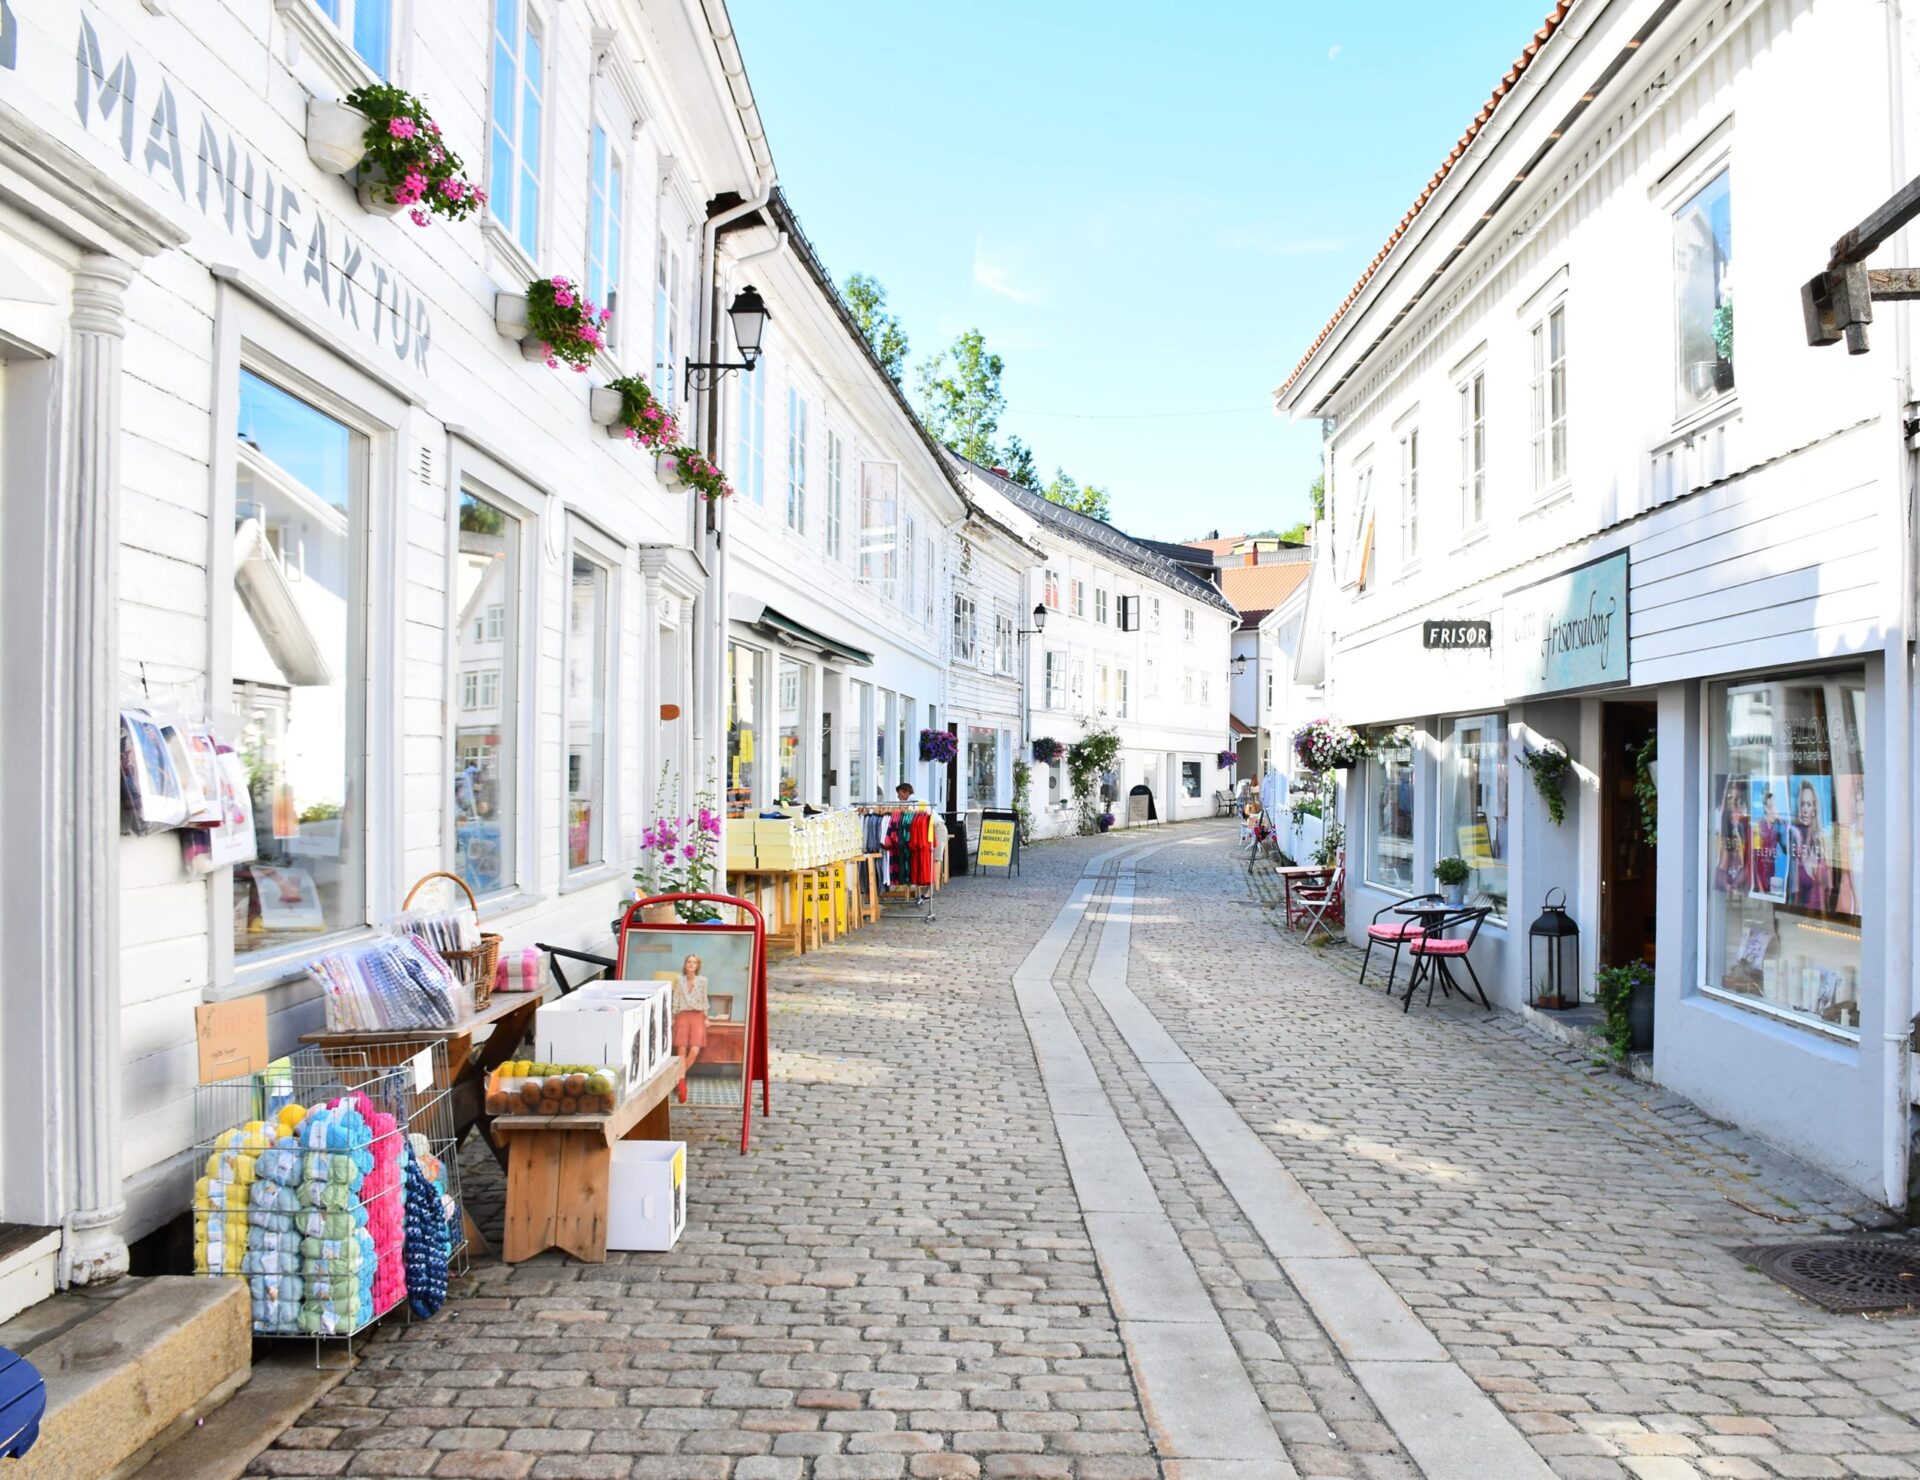 Stroll through narrow streets lined with white wooden houses in Southern Norway